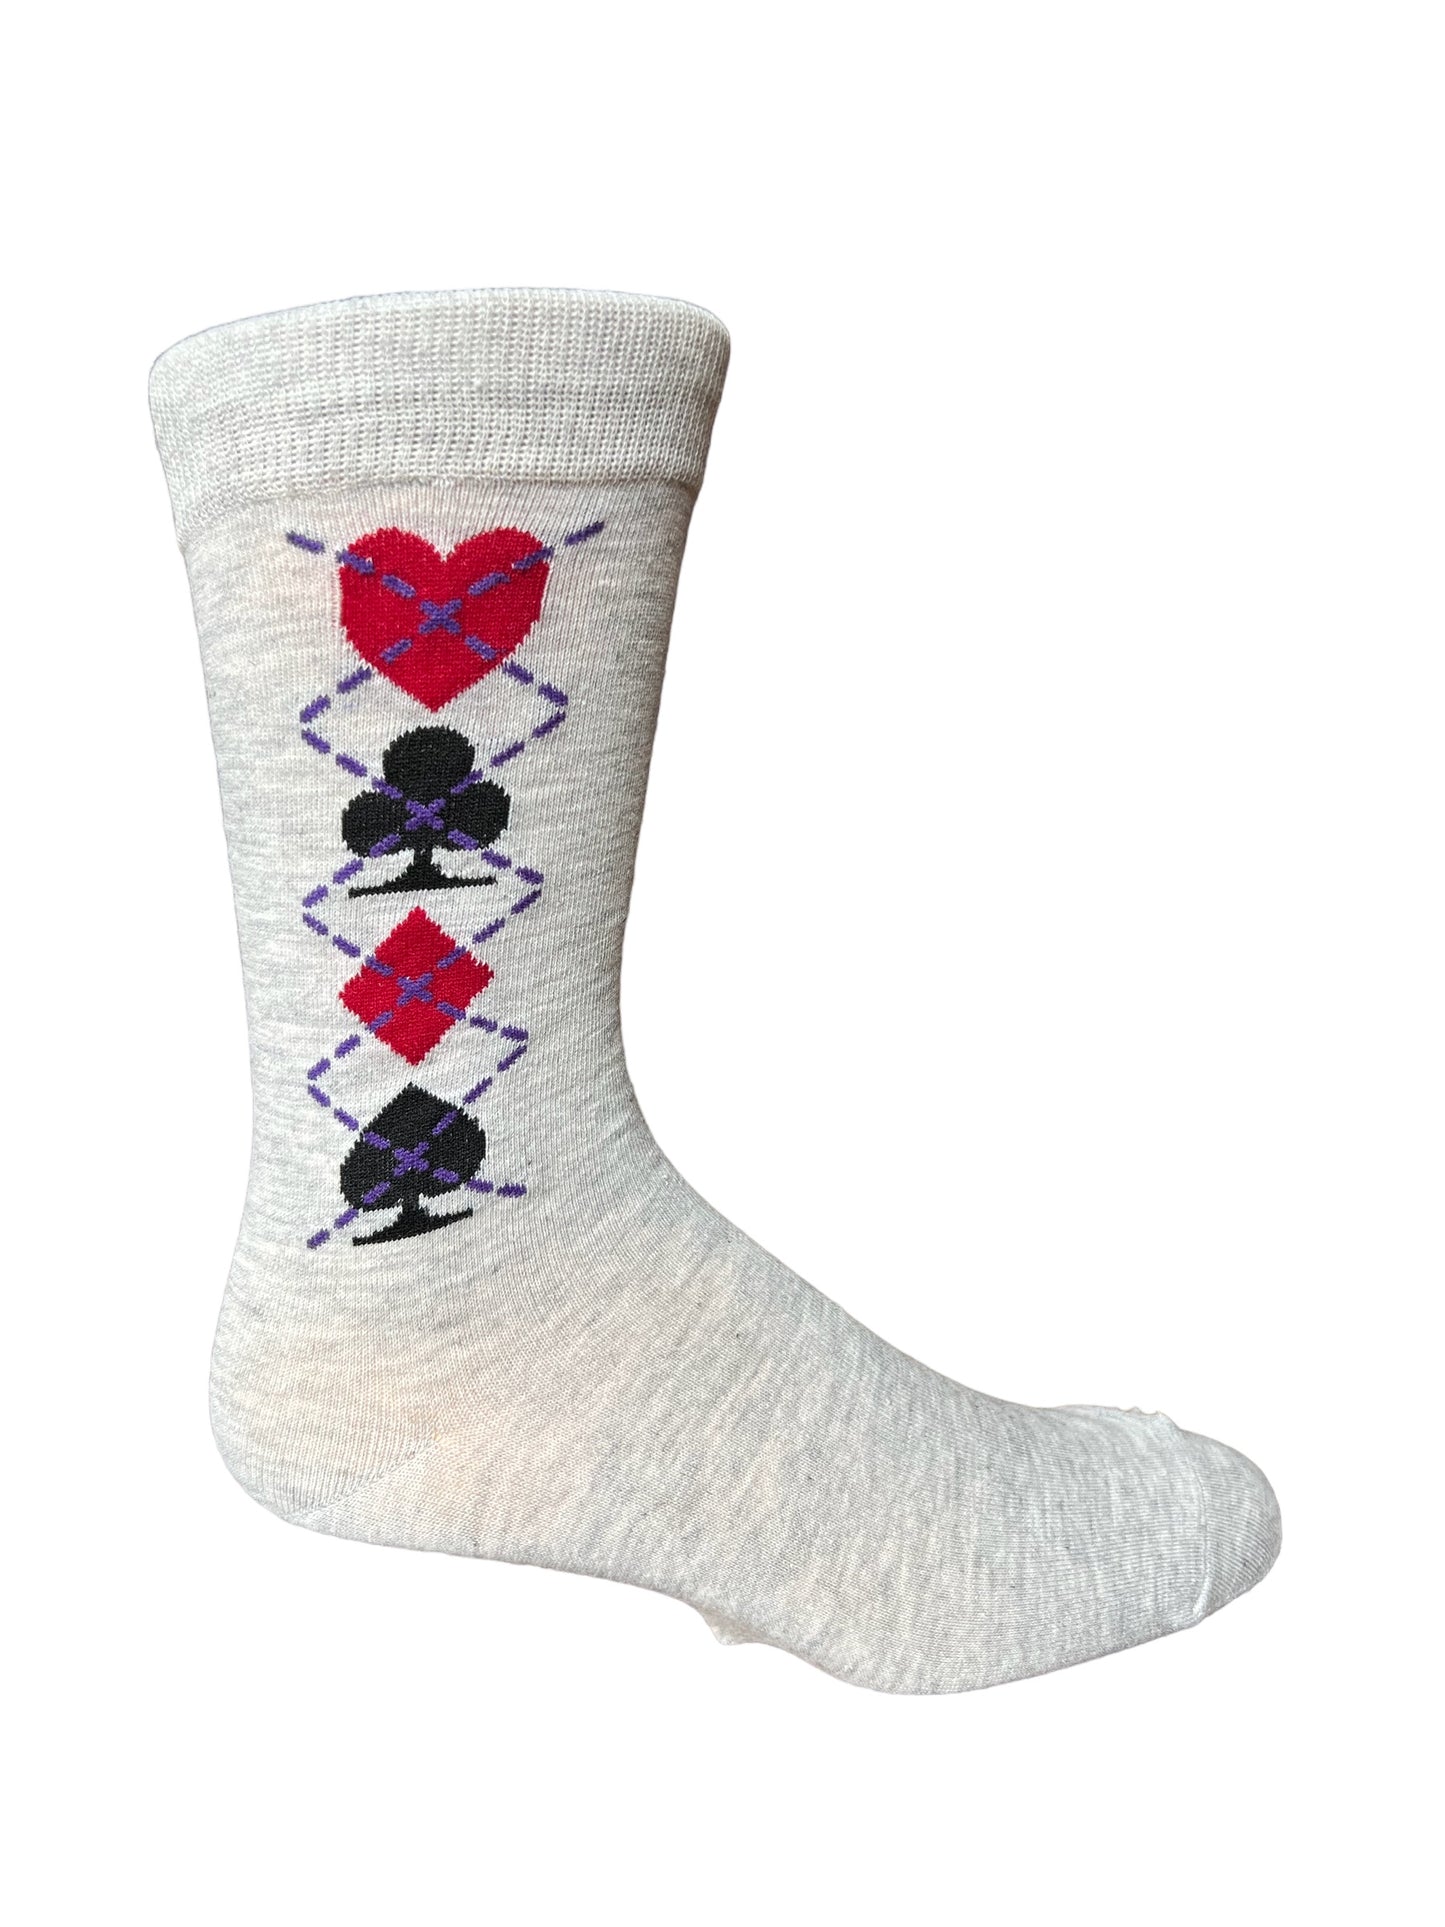 Let's Play Cards! Socks